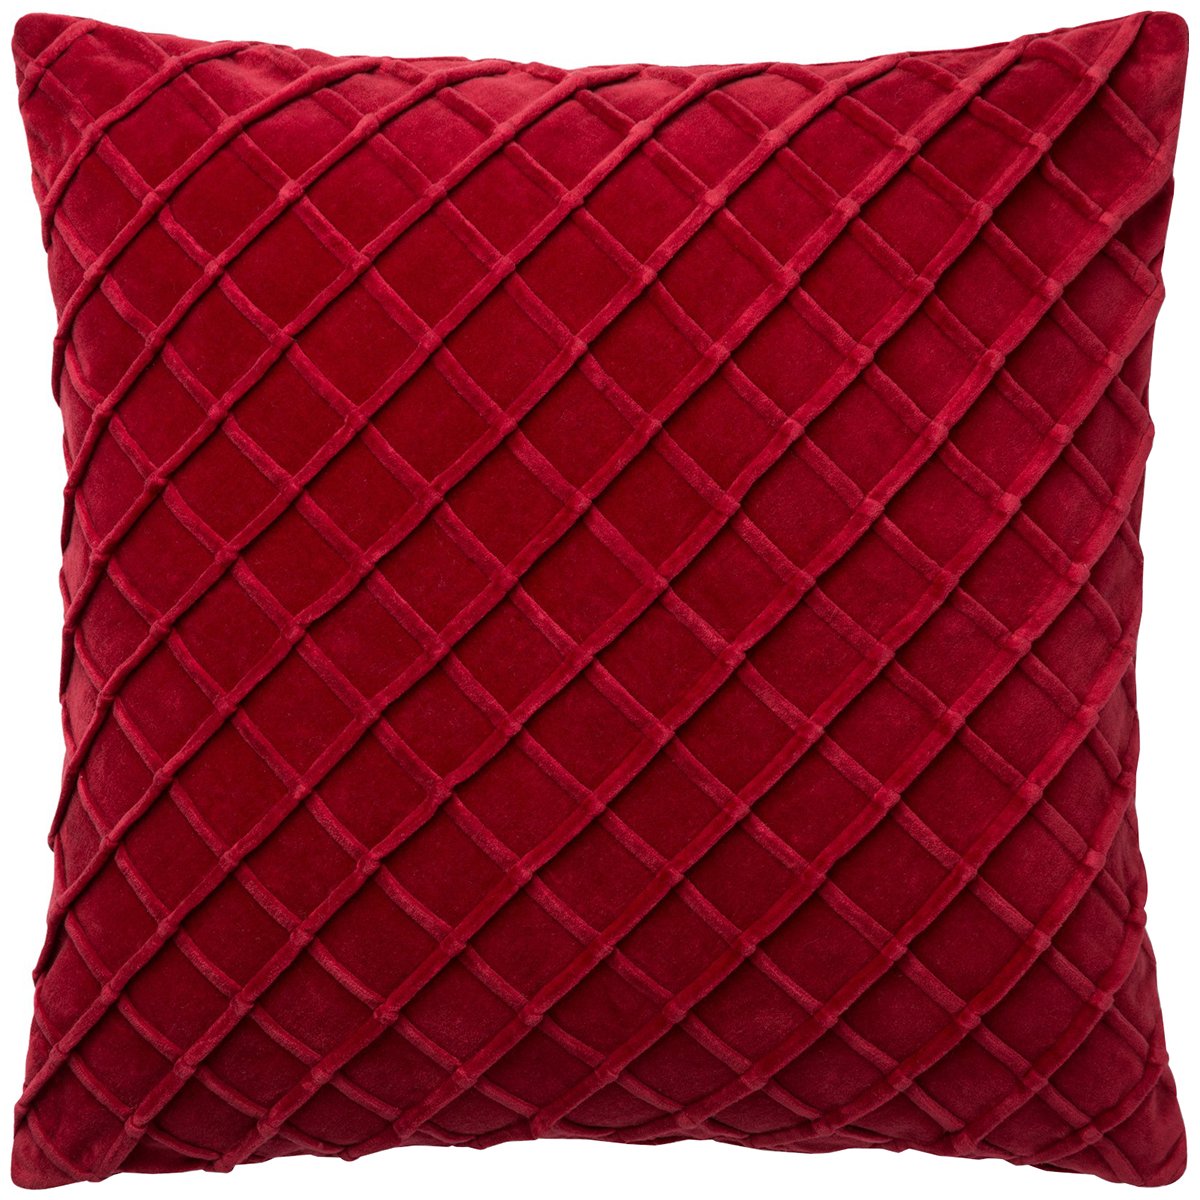 Loloi P0125 Red 22" x 22" Pillows Set of 2